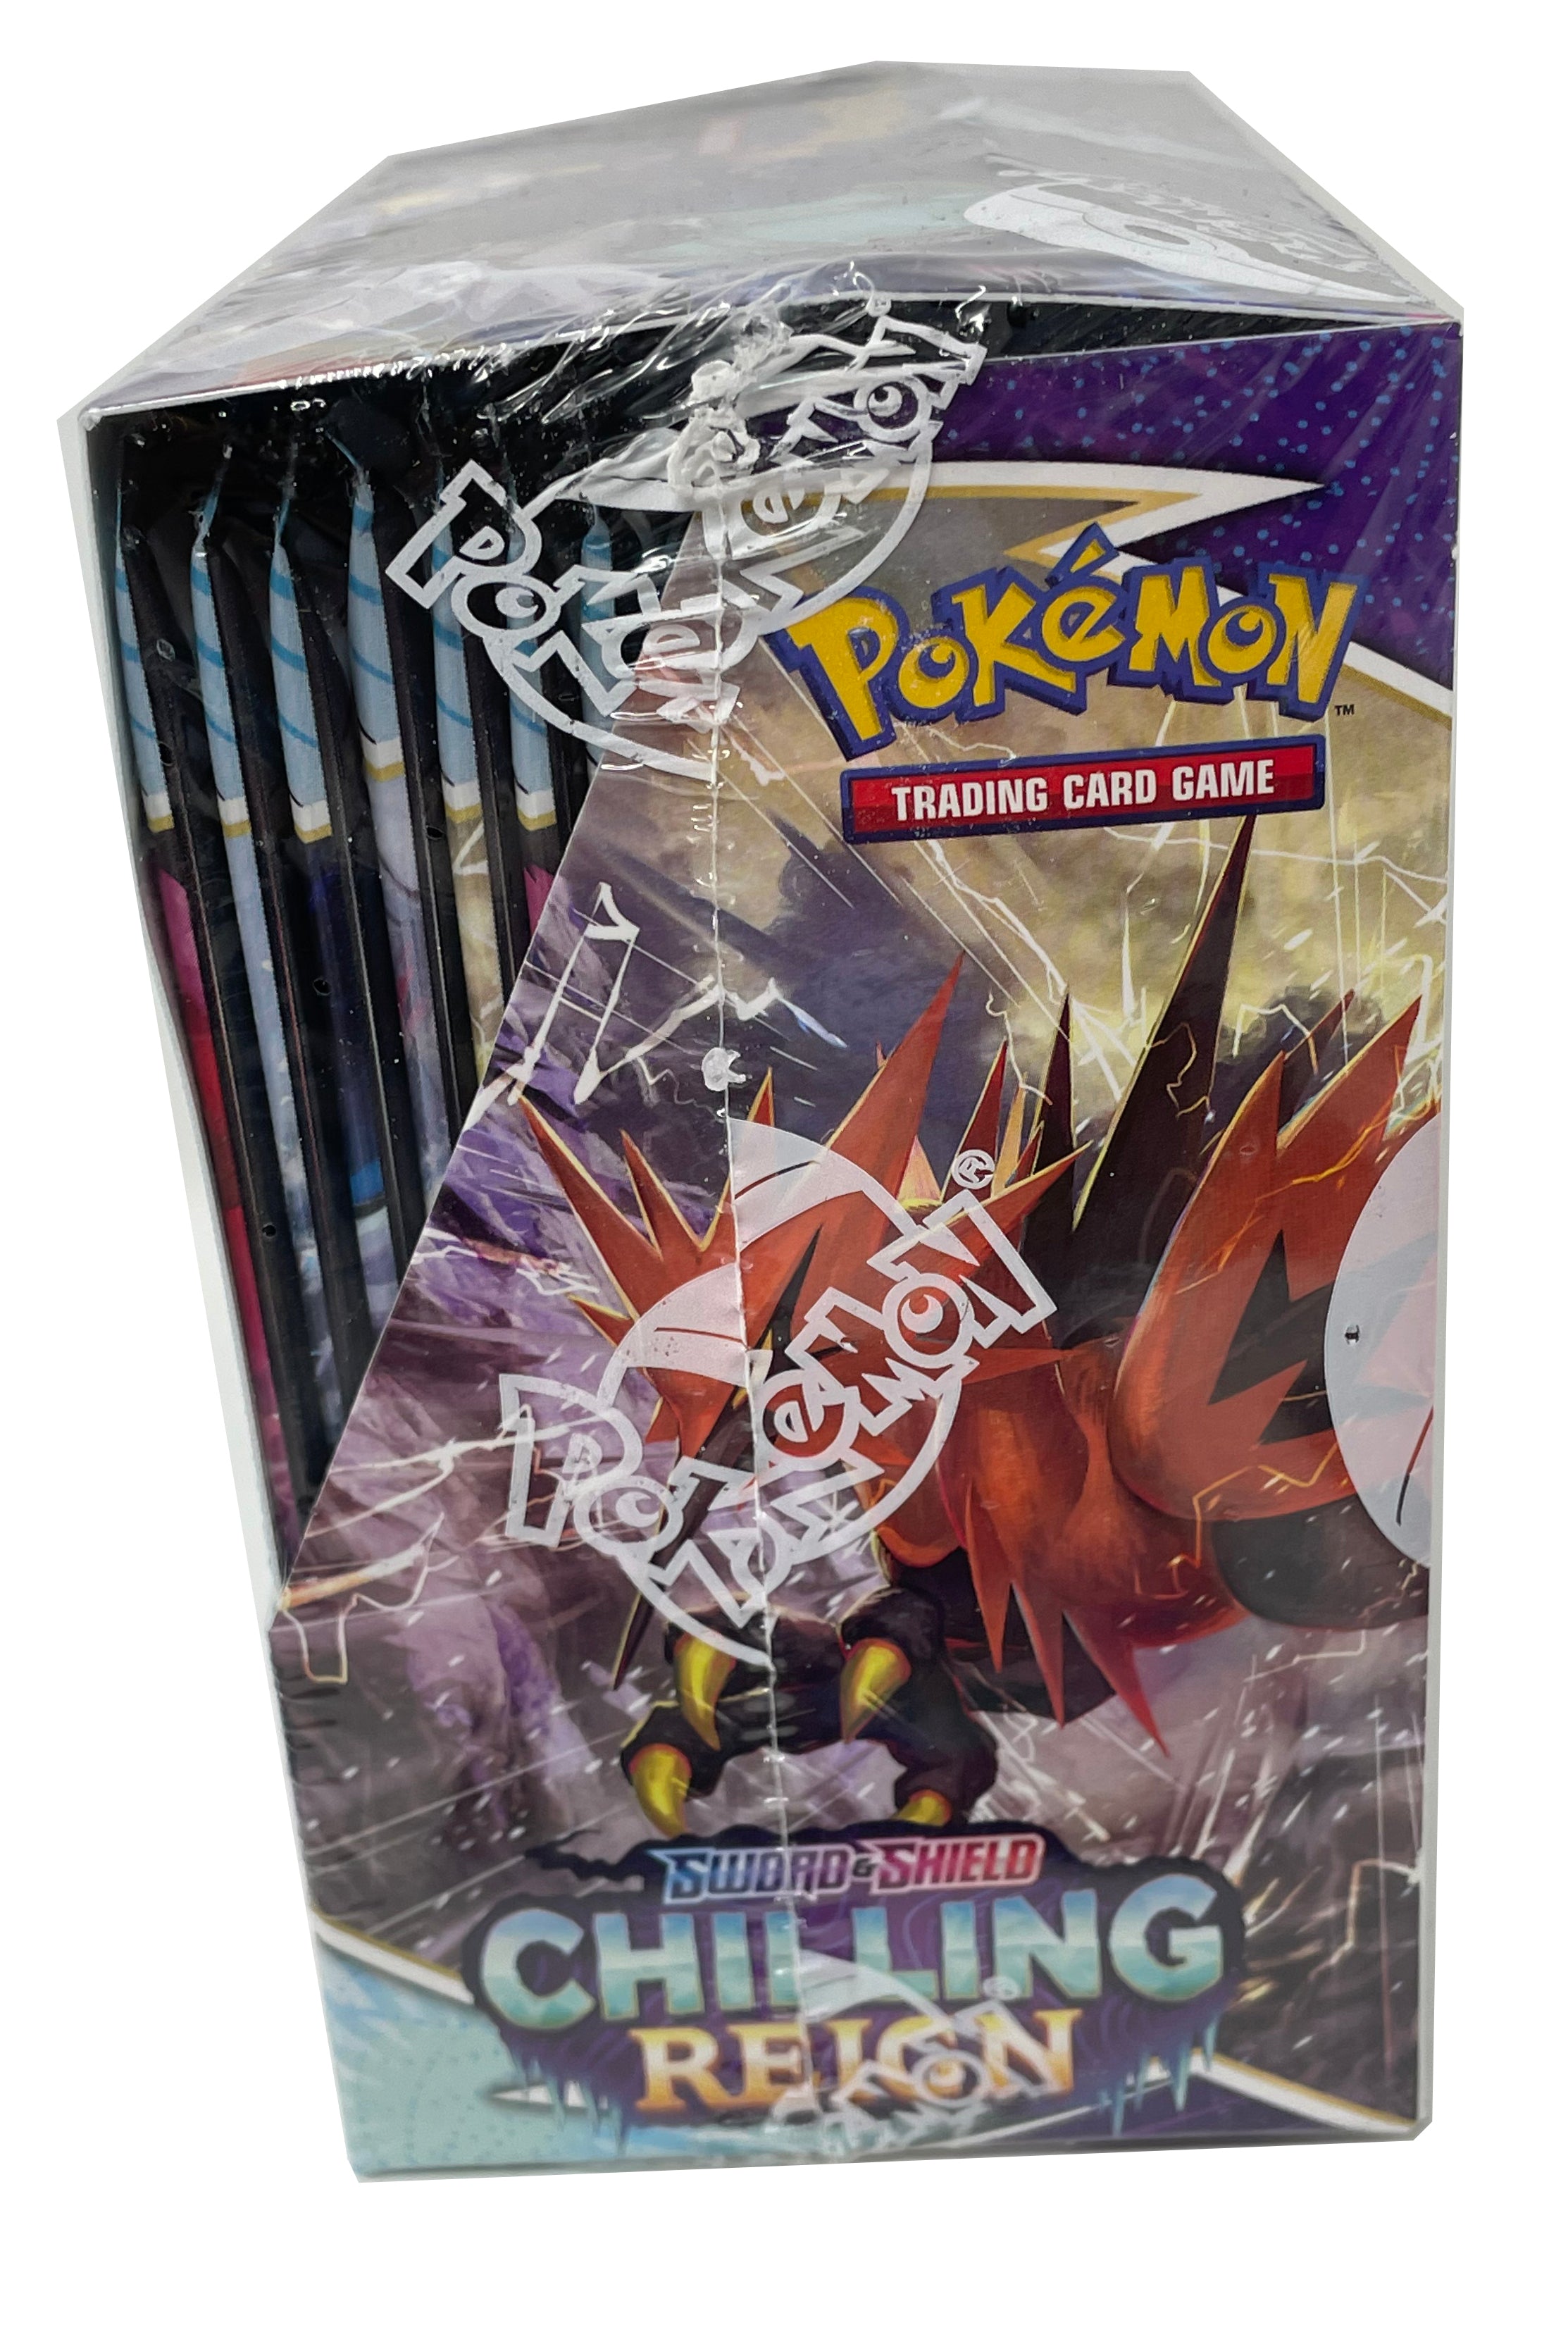 6-Pack CASE Pokemon TCG Chilling Reign Booster Box FACTORY SEALED NEW